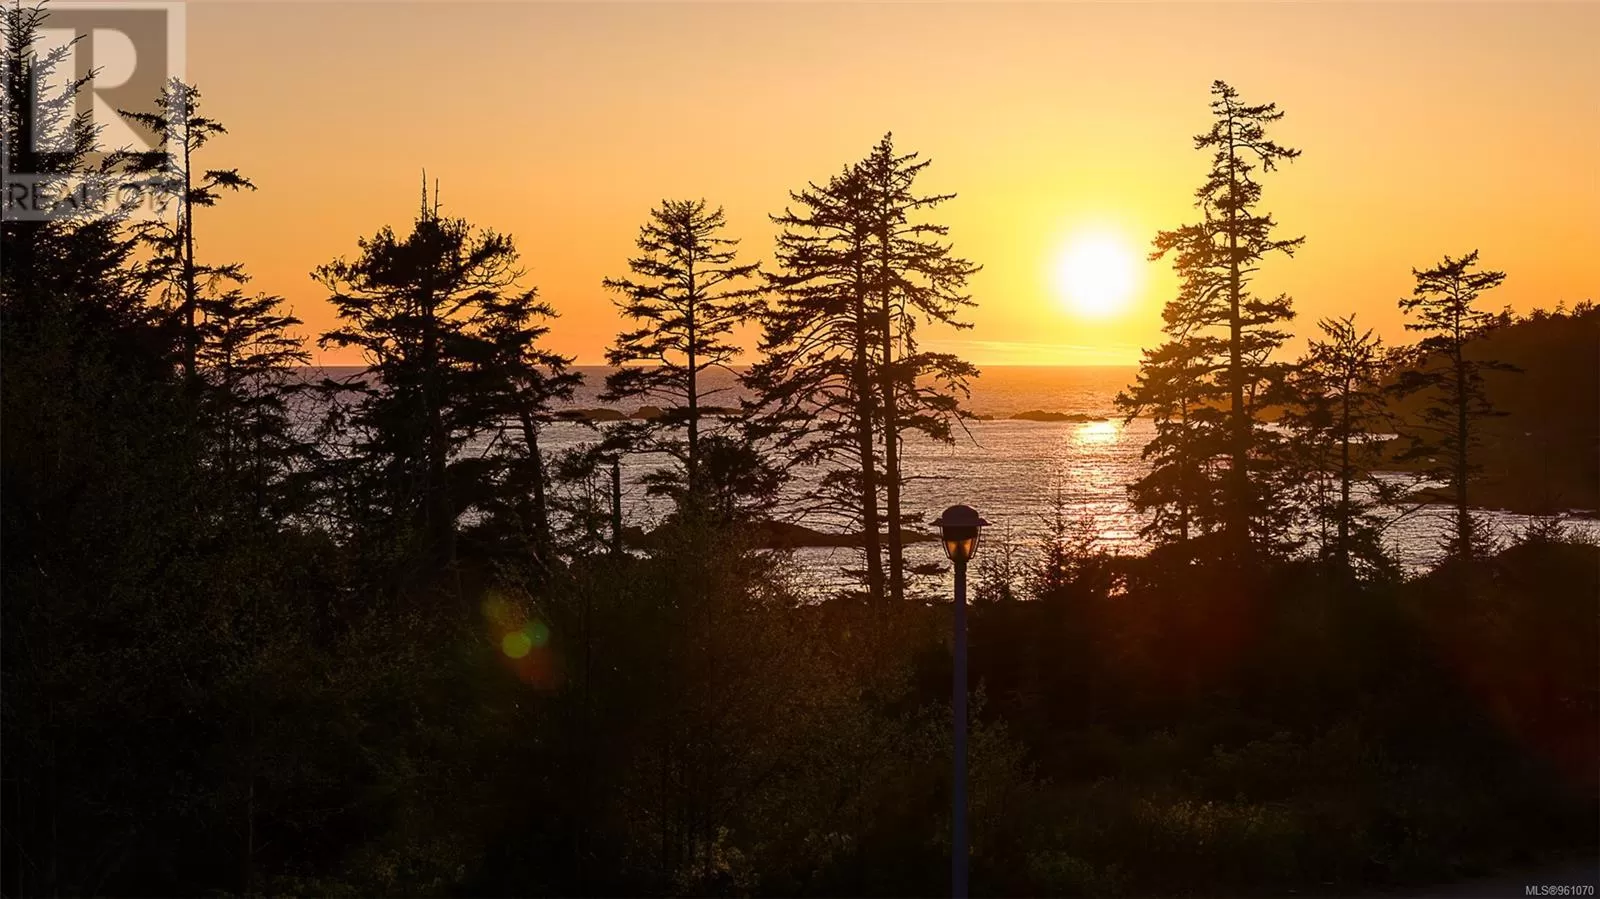 Lot A Marine Dr, Ucluelet, British Columbia V0R 3A0